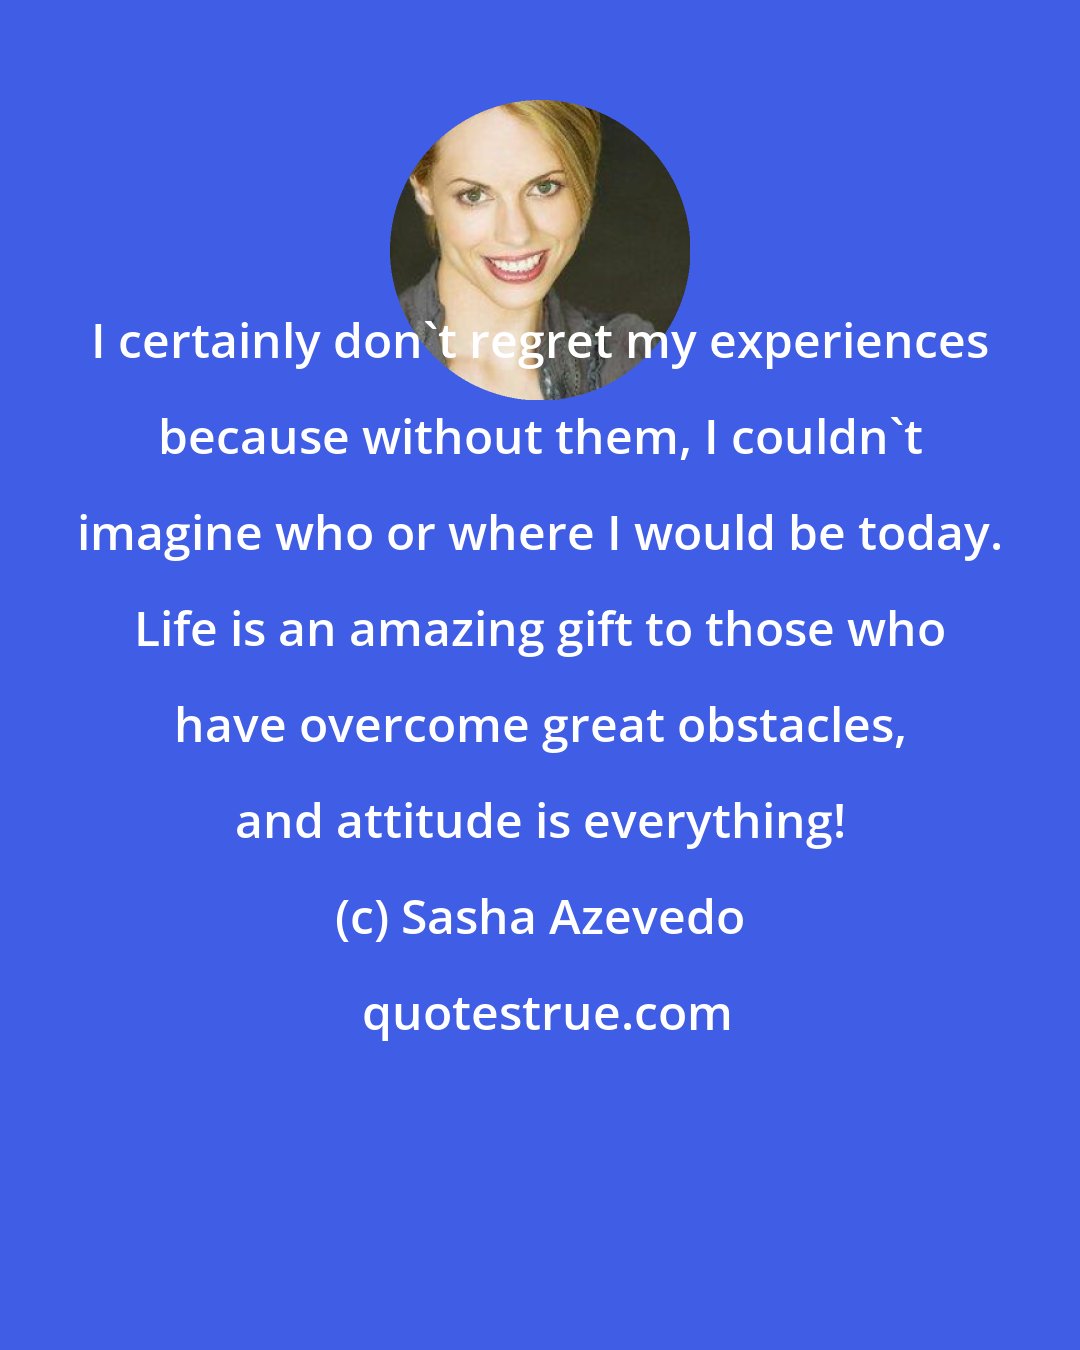 Sasha Azevedo: I certainly don't regret my experiences because without them, I couldn't imagine who or where I would be today. Life is an amazing gift to those who have overcome great obstacles, and attitude is everything!